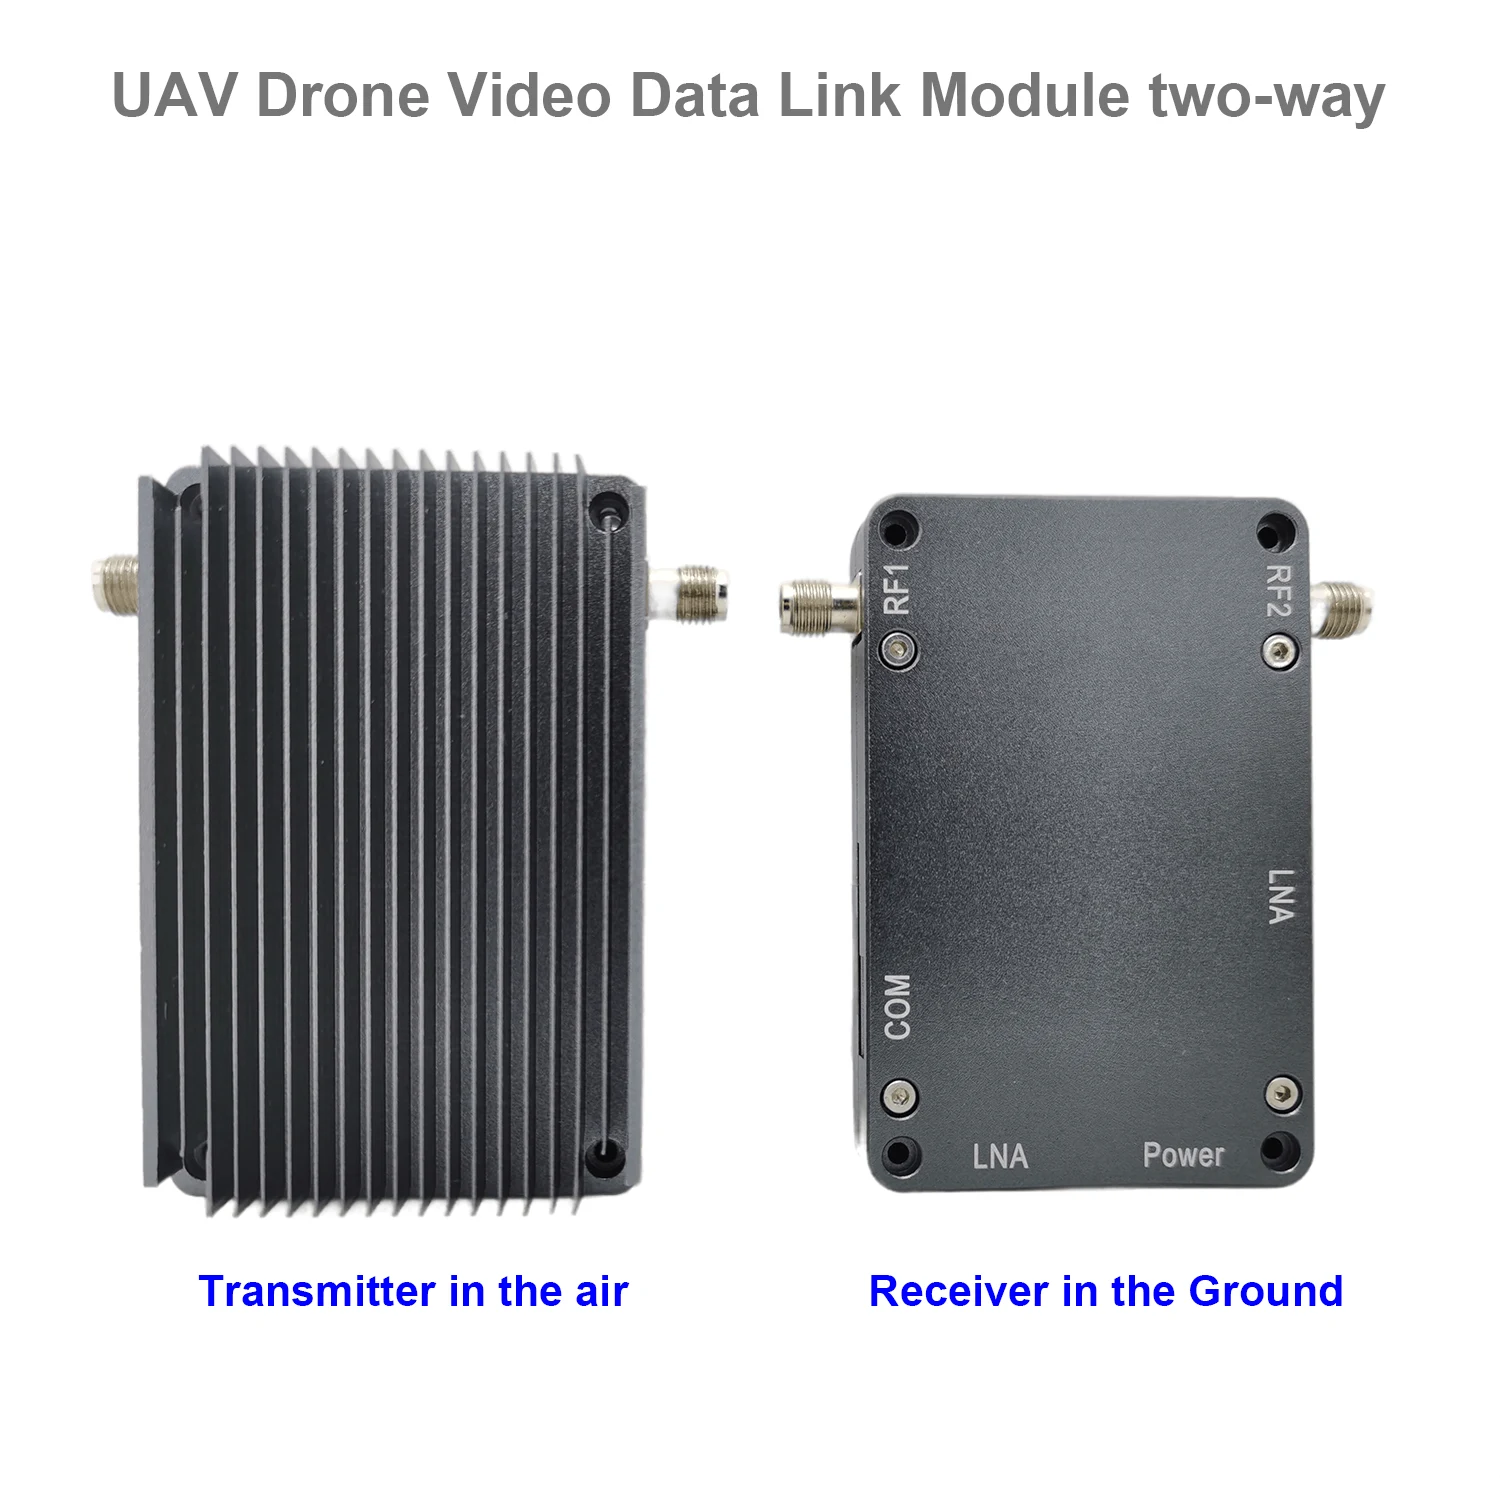 UAV drone video data link module wireless video transmitter and receiver for camera long-range TDD transceiver two-way